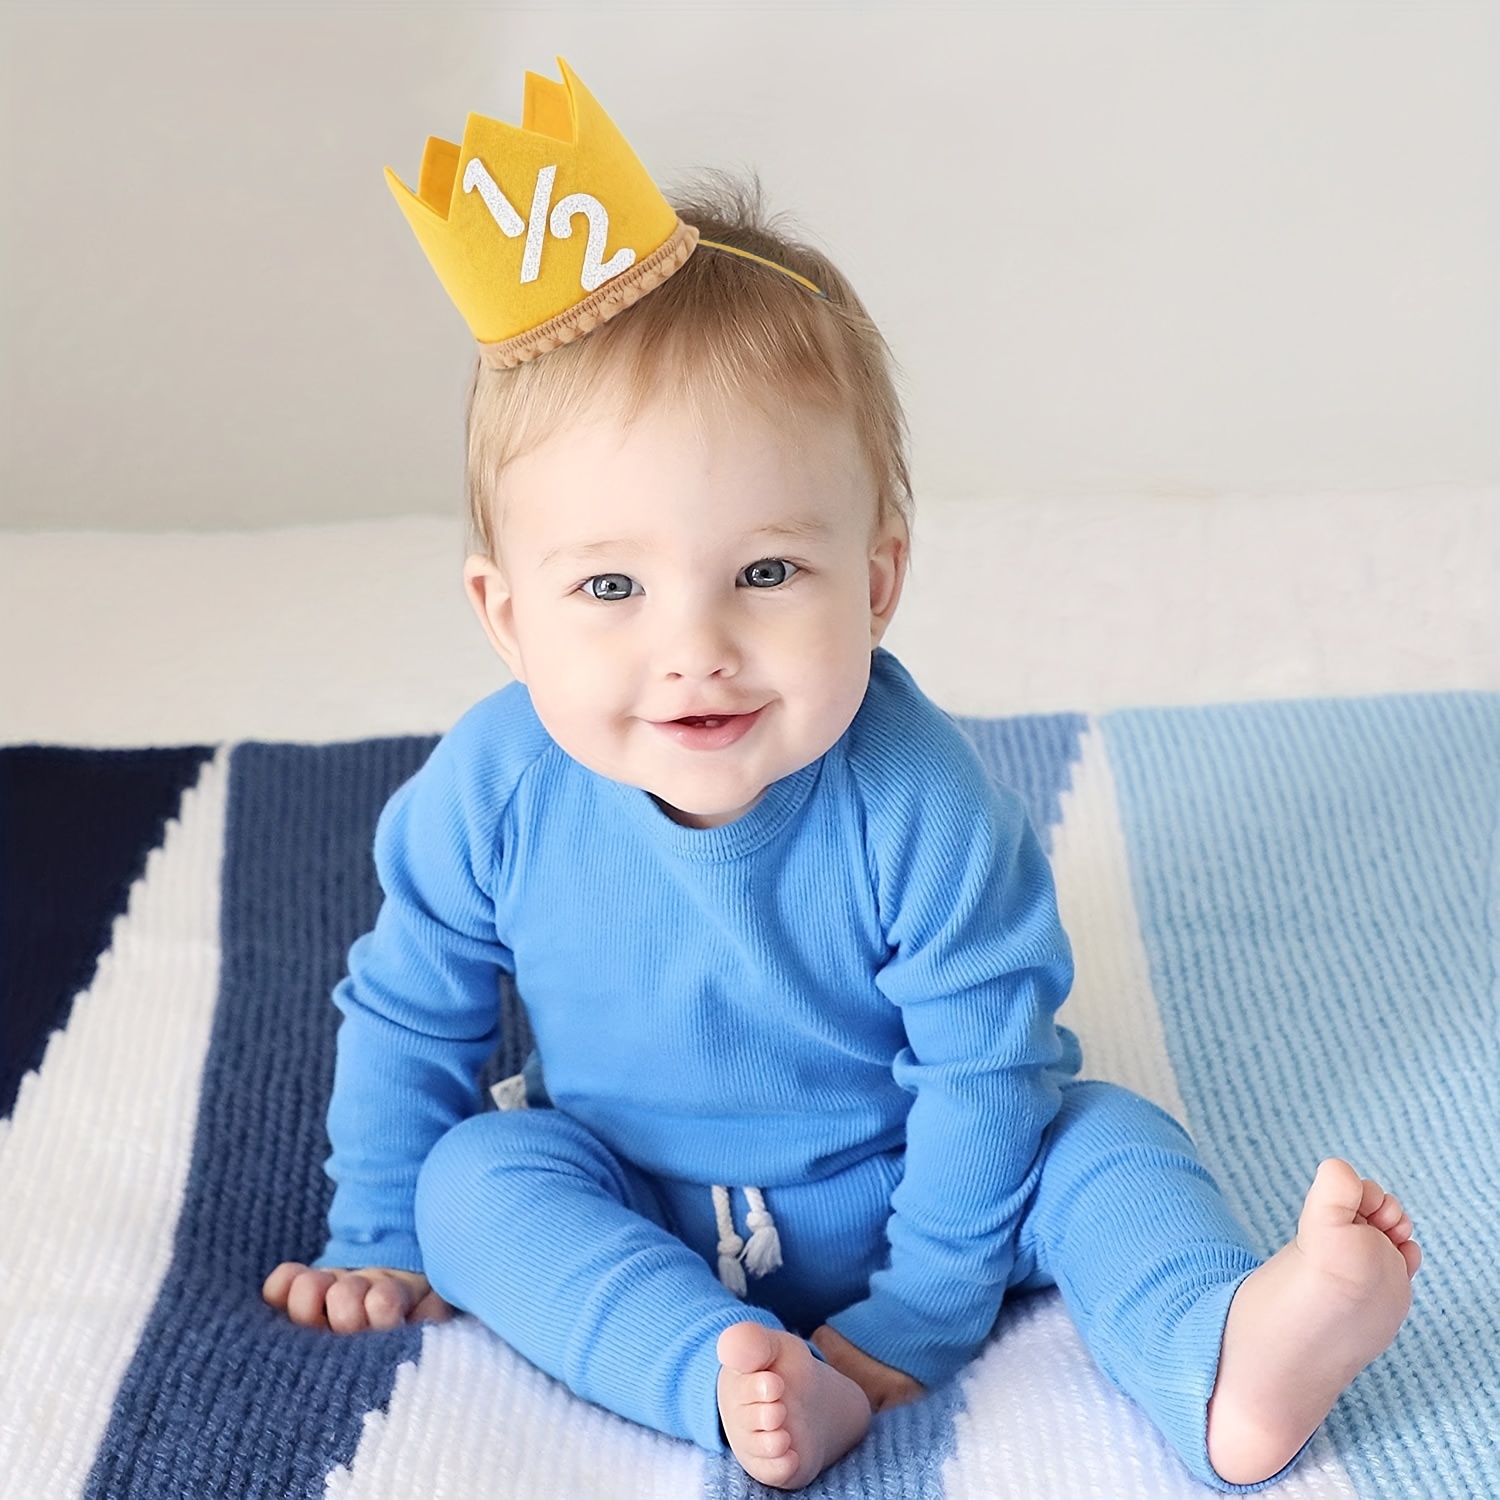 Baby Headband Crown Sparkly 1st Birthday Hat Party Outfit Boy/Decor Girl